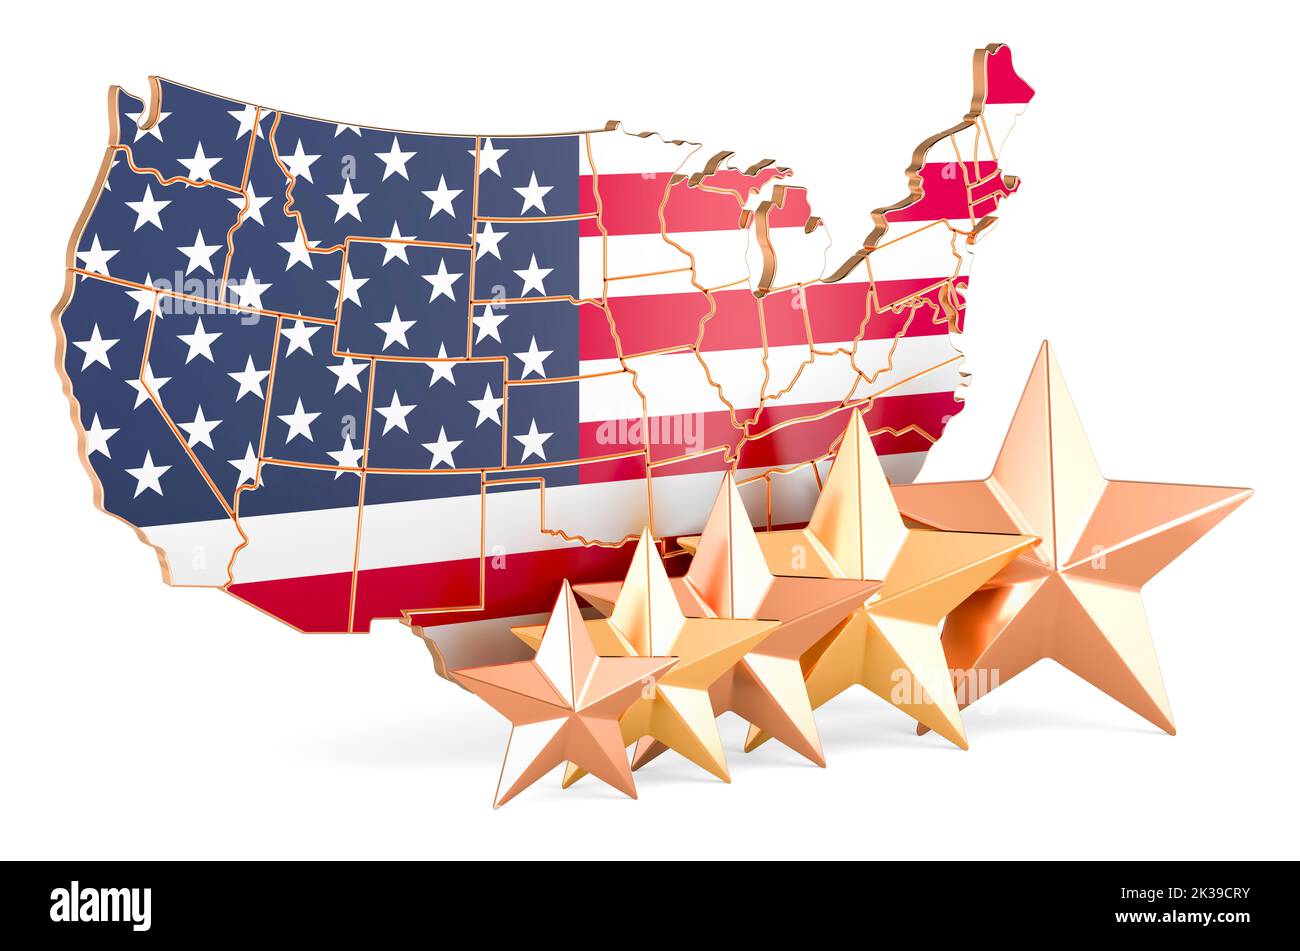 The United States map with five stars. Rating, quality, service in the USA. 3D rendering isolated on white background Stock Photo